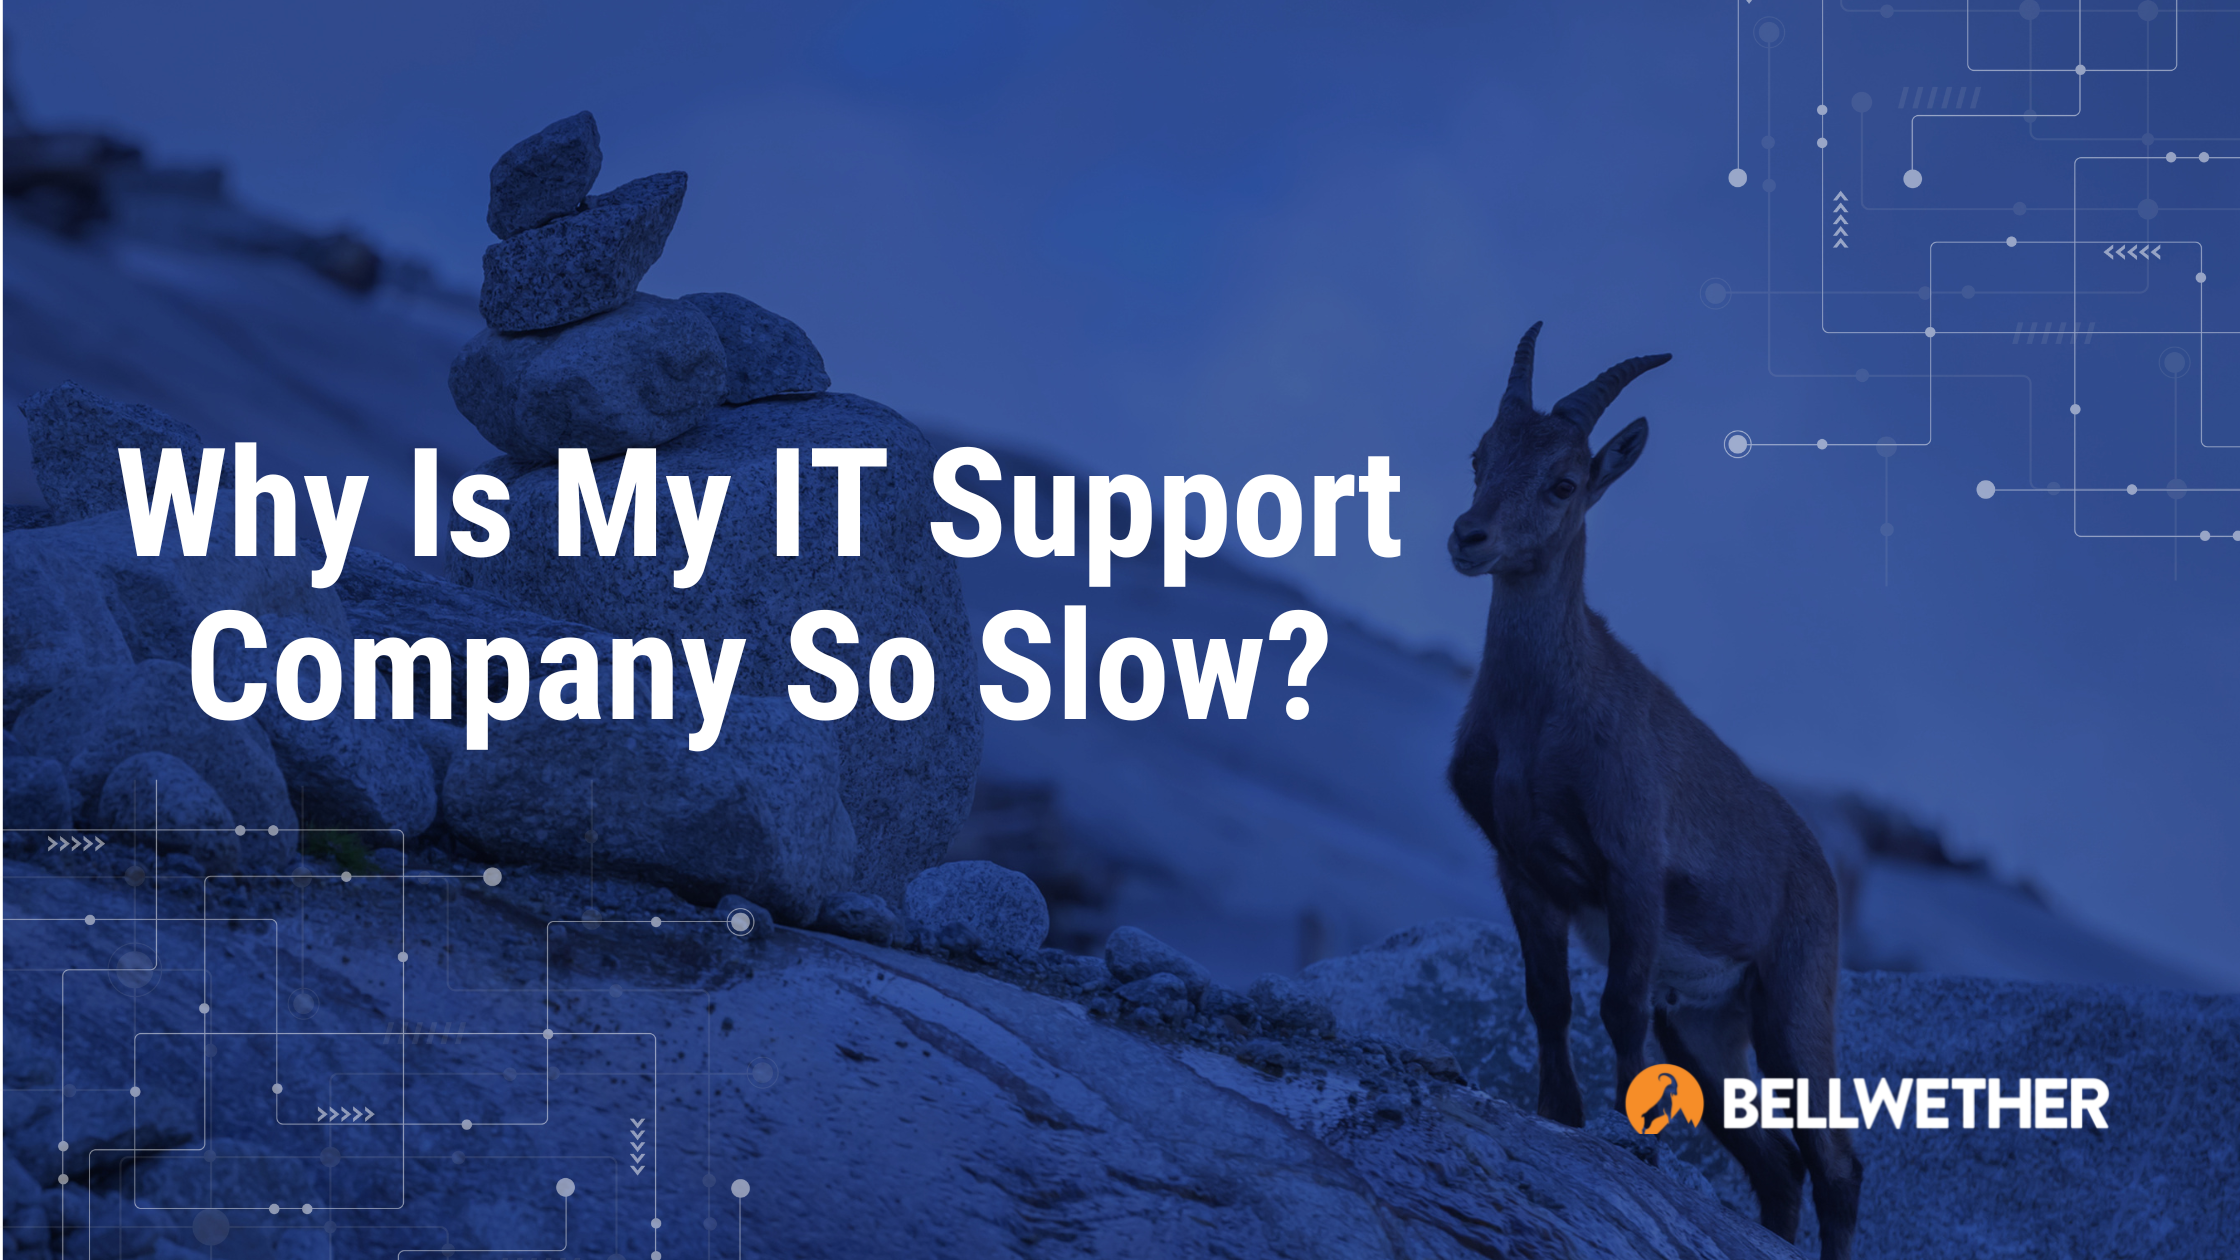 Why is my IT support company so slow?